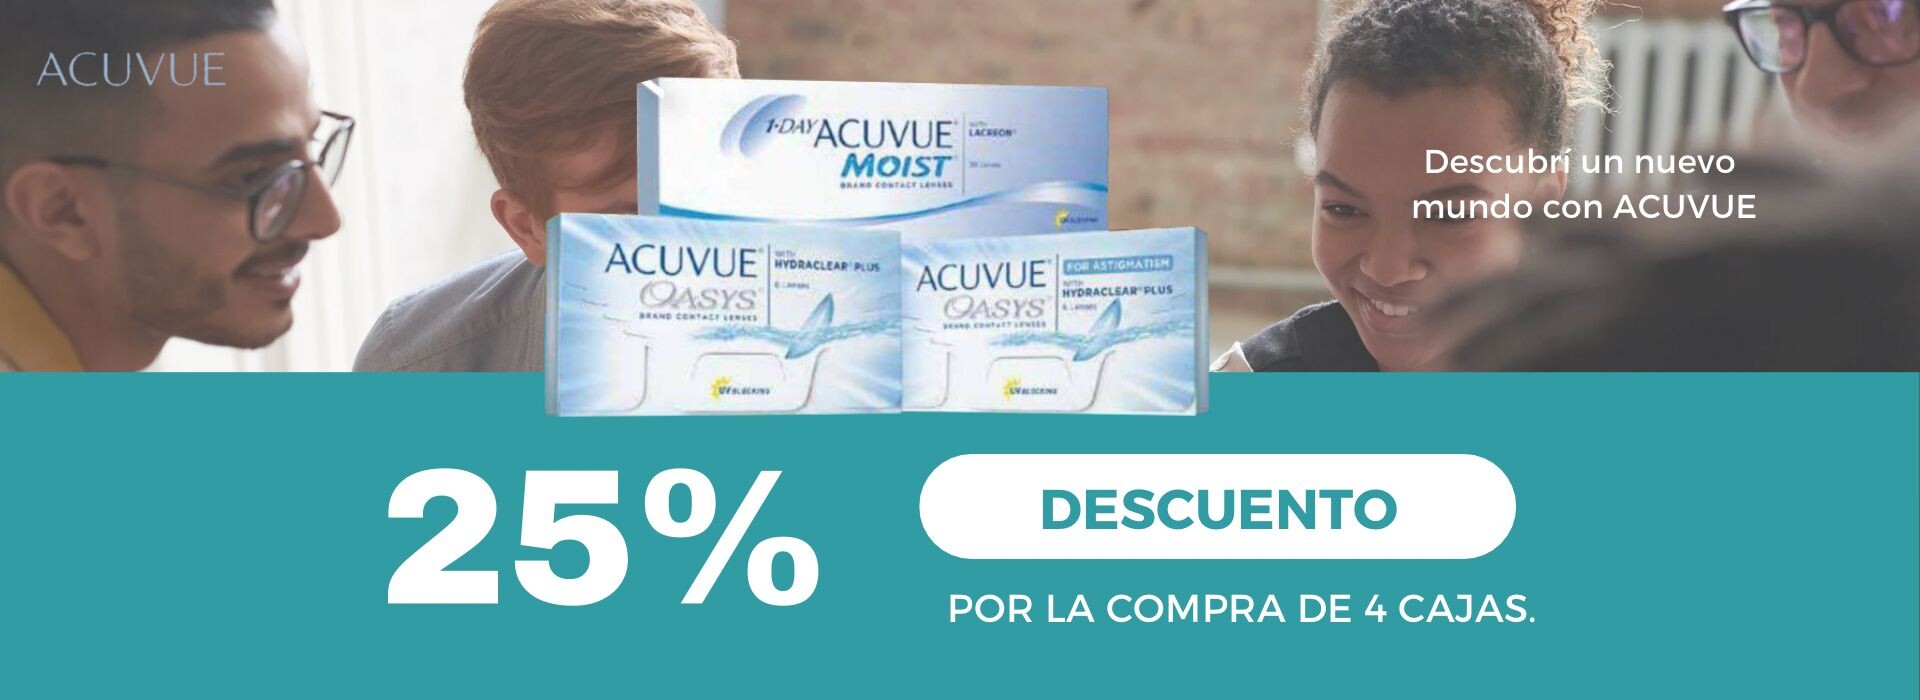 Acuvue 3+1